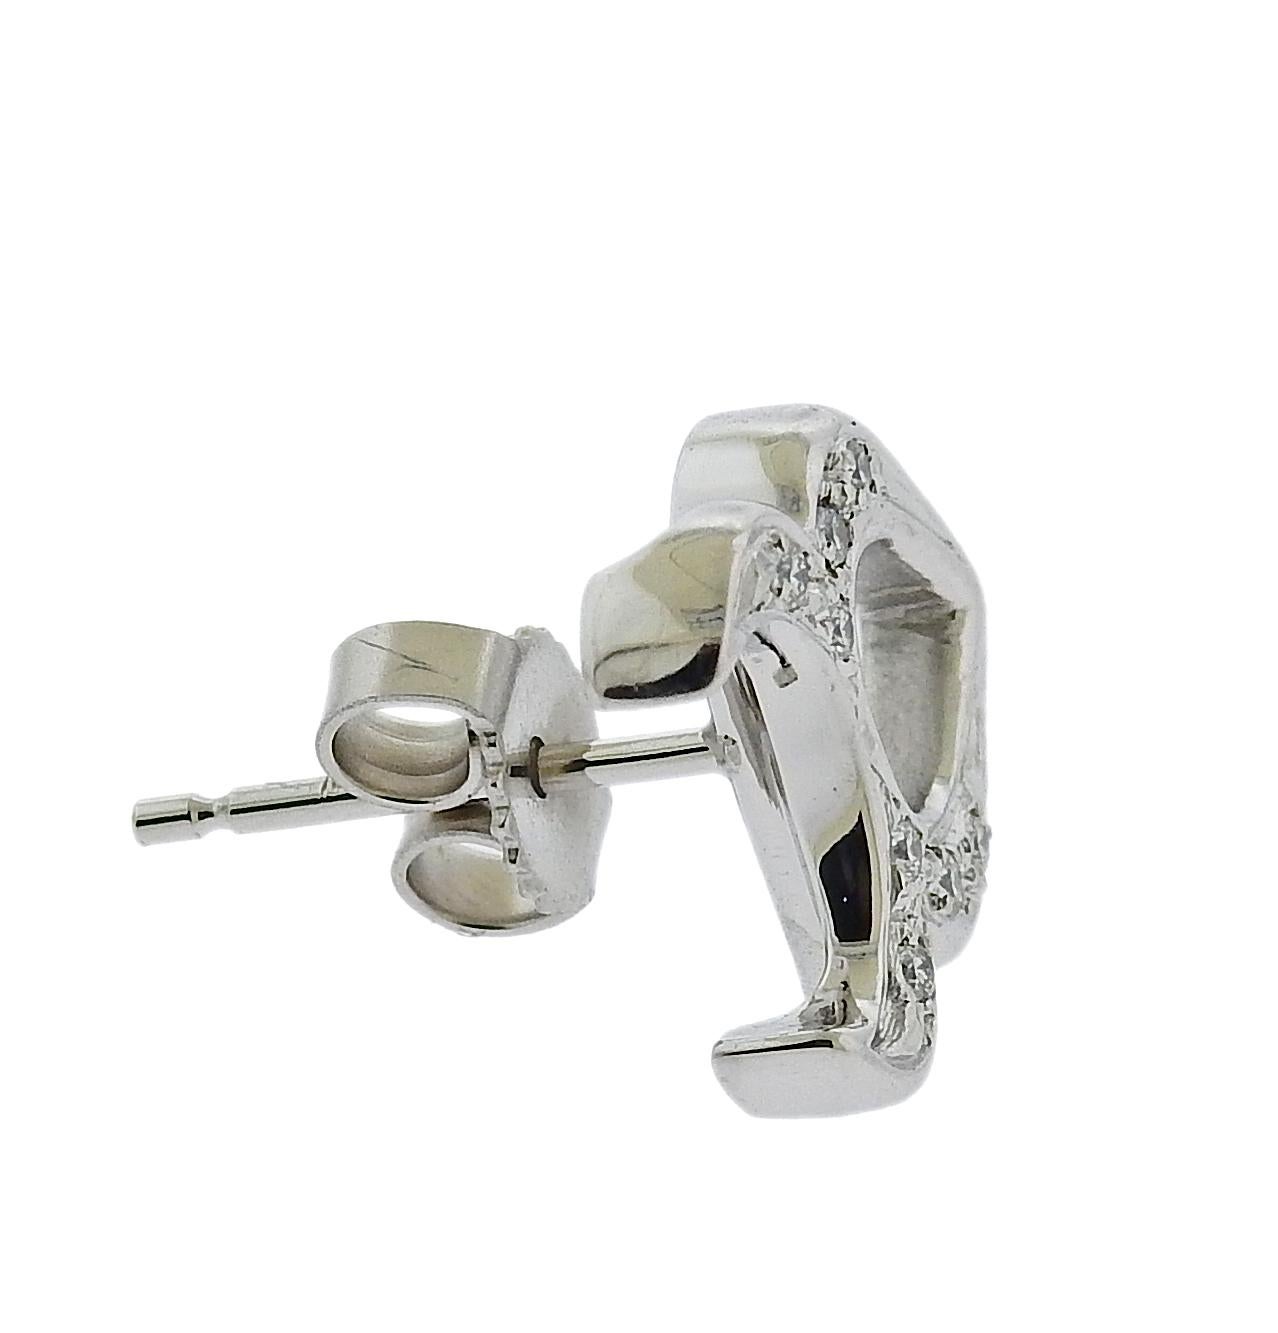 18k white gold stud earrings, with Taurus zodiac sign. By Gubelin. With approx. 0.10ctw in G/VS diamonds. Earrings are 13mm x 11mm. Weigh 4.6 grams. Marked: Gubelin mark, 750.